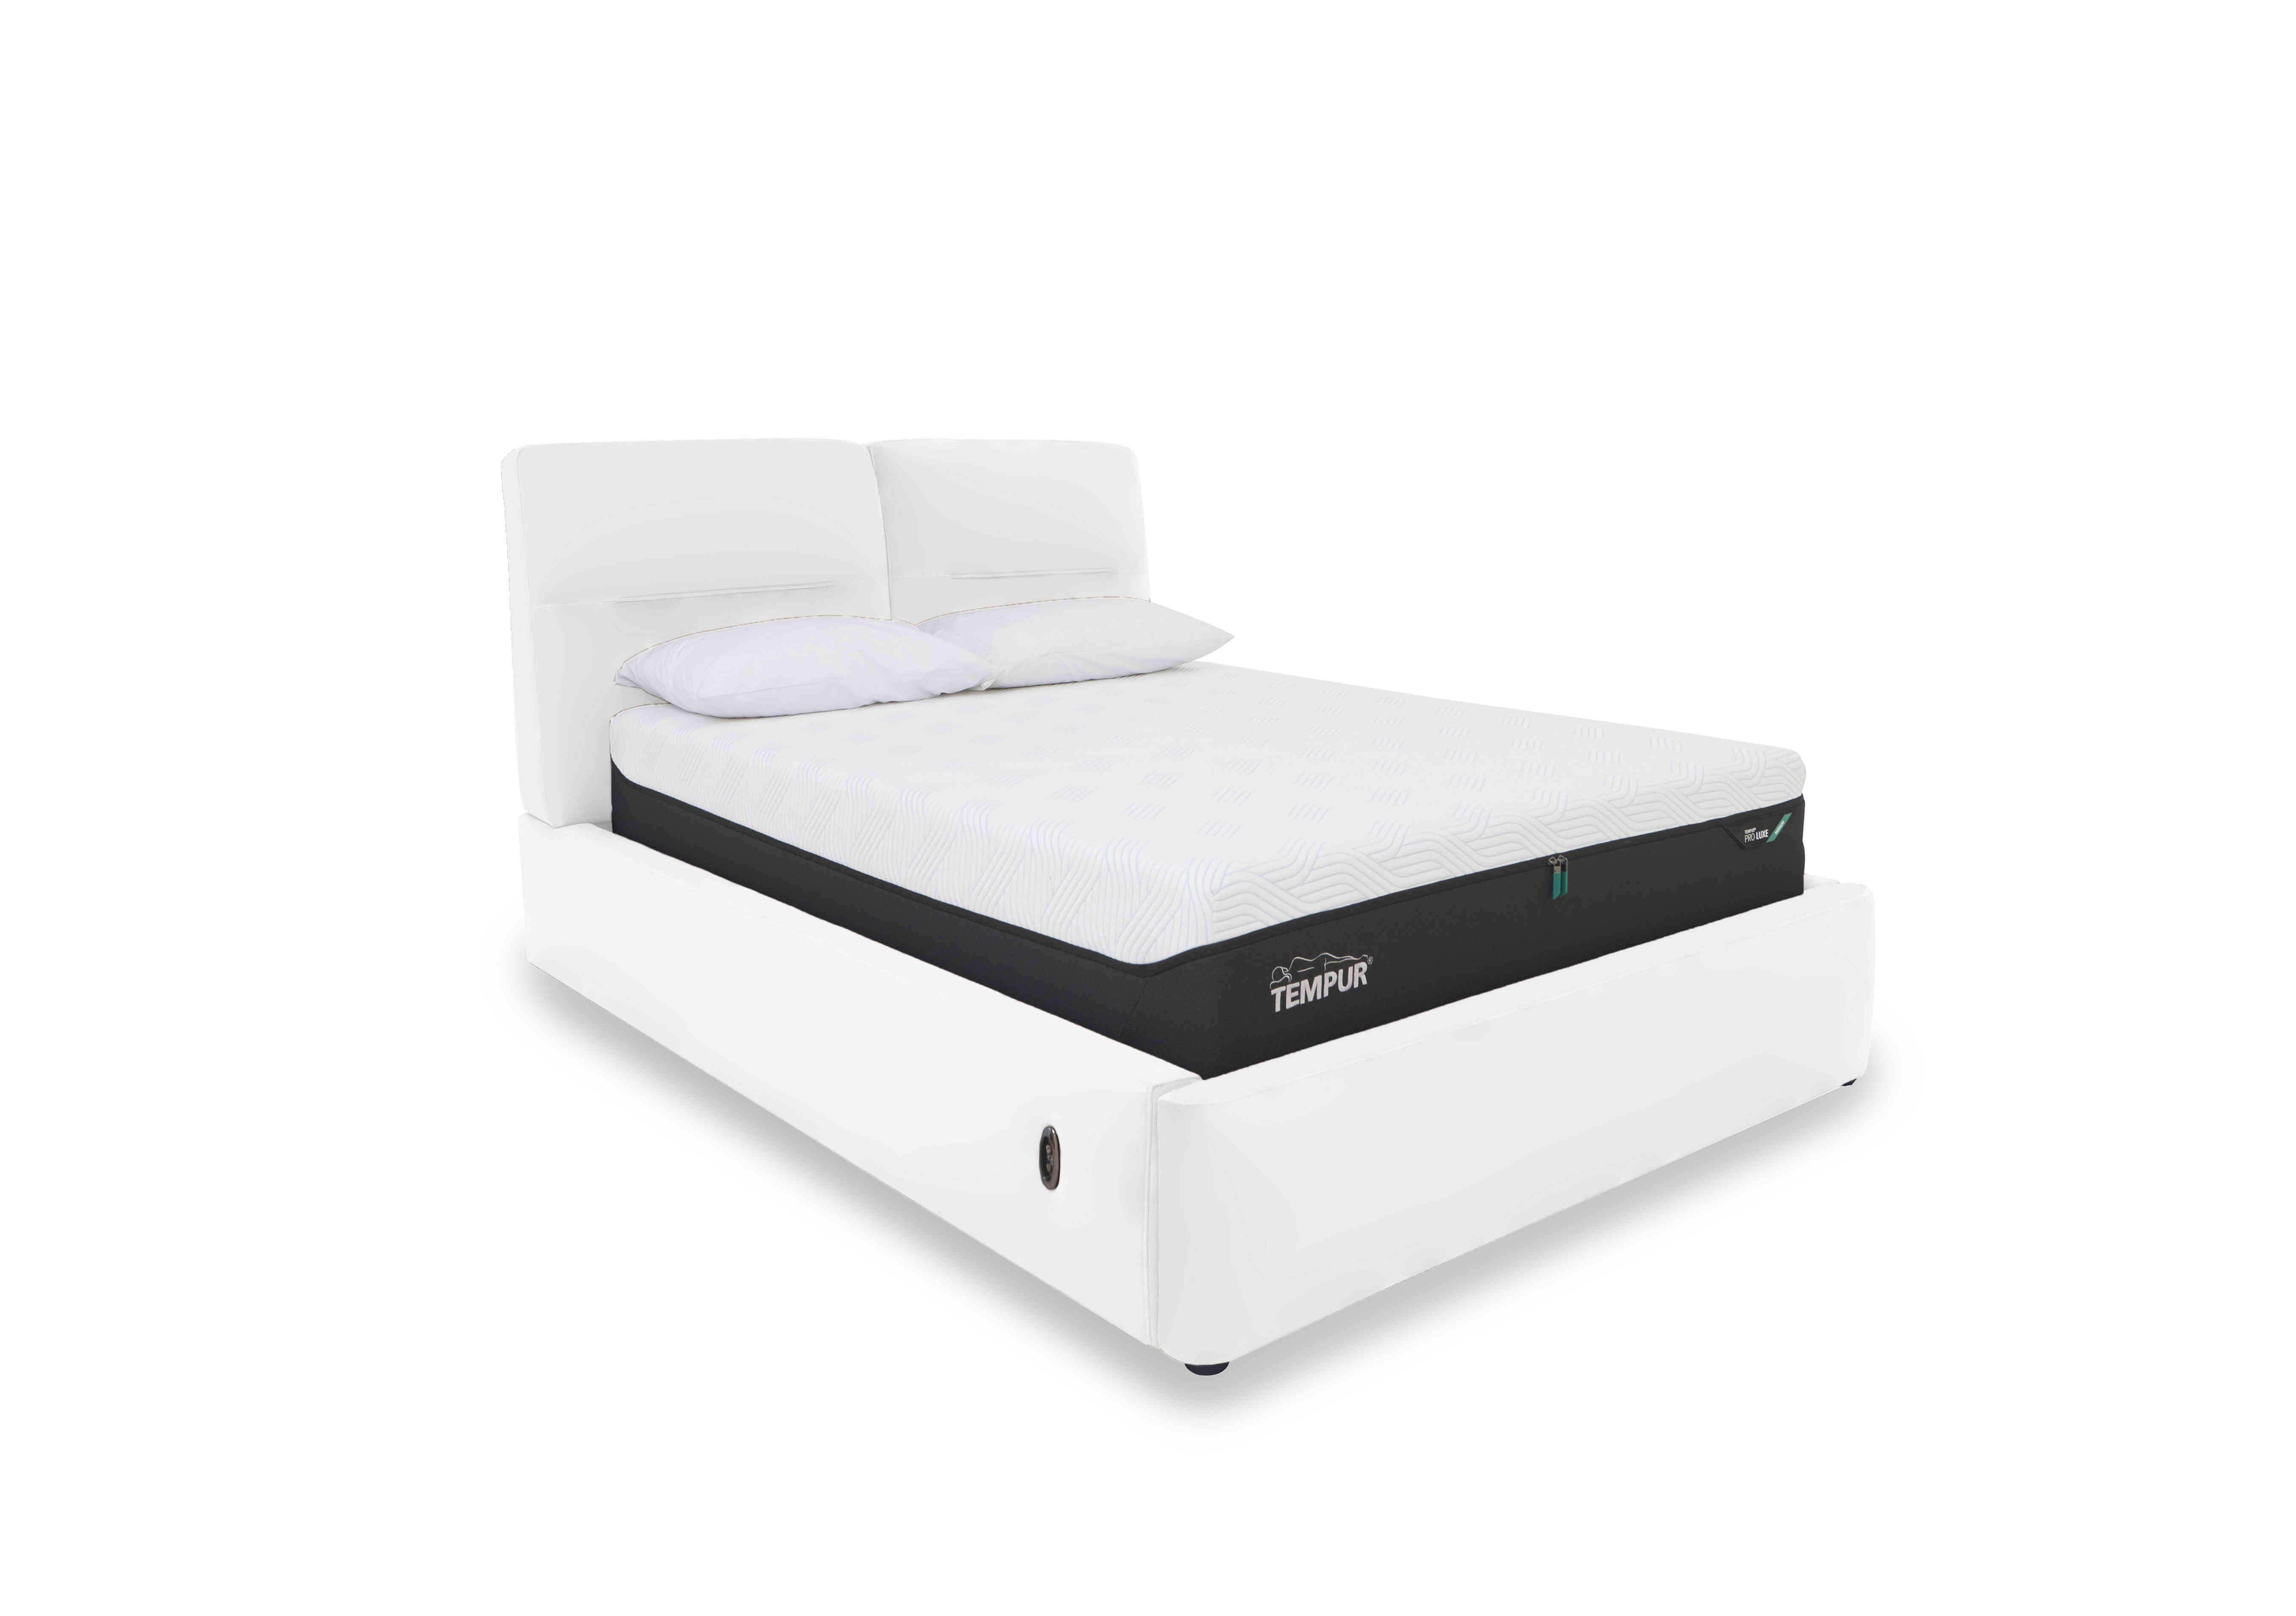 Stark Leather Electric Ottoman Bed Frame in Bv-744d Star White on Furniture Village